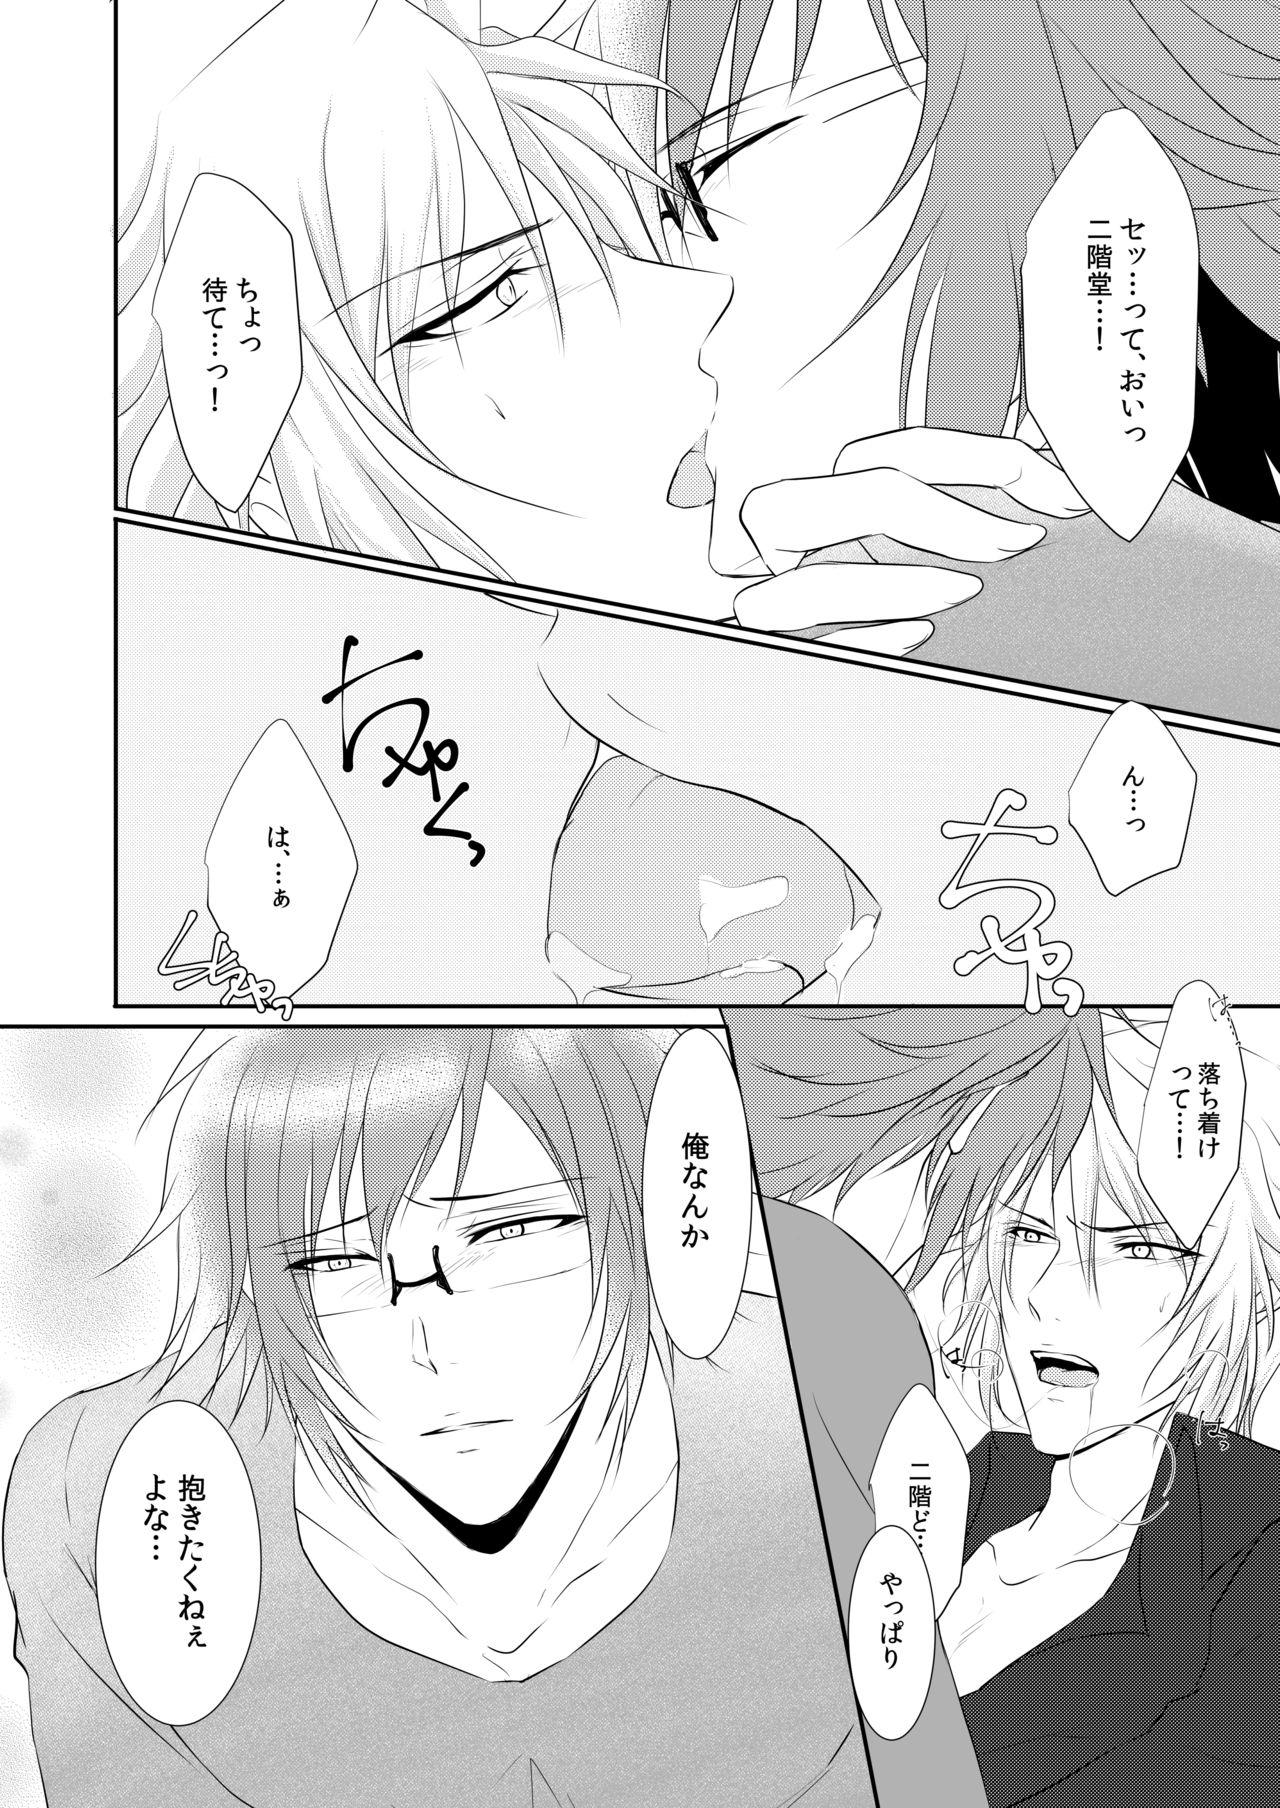 Alt My lips to overlip your lips - Idolish7 Abuse - Page 7